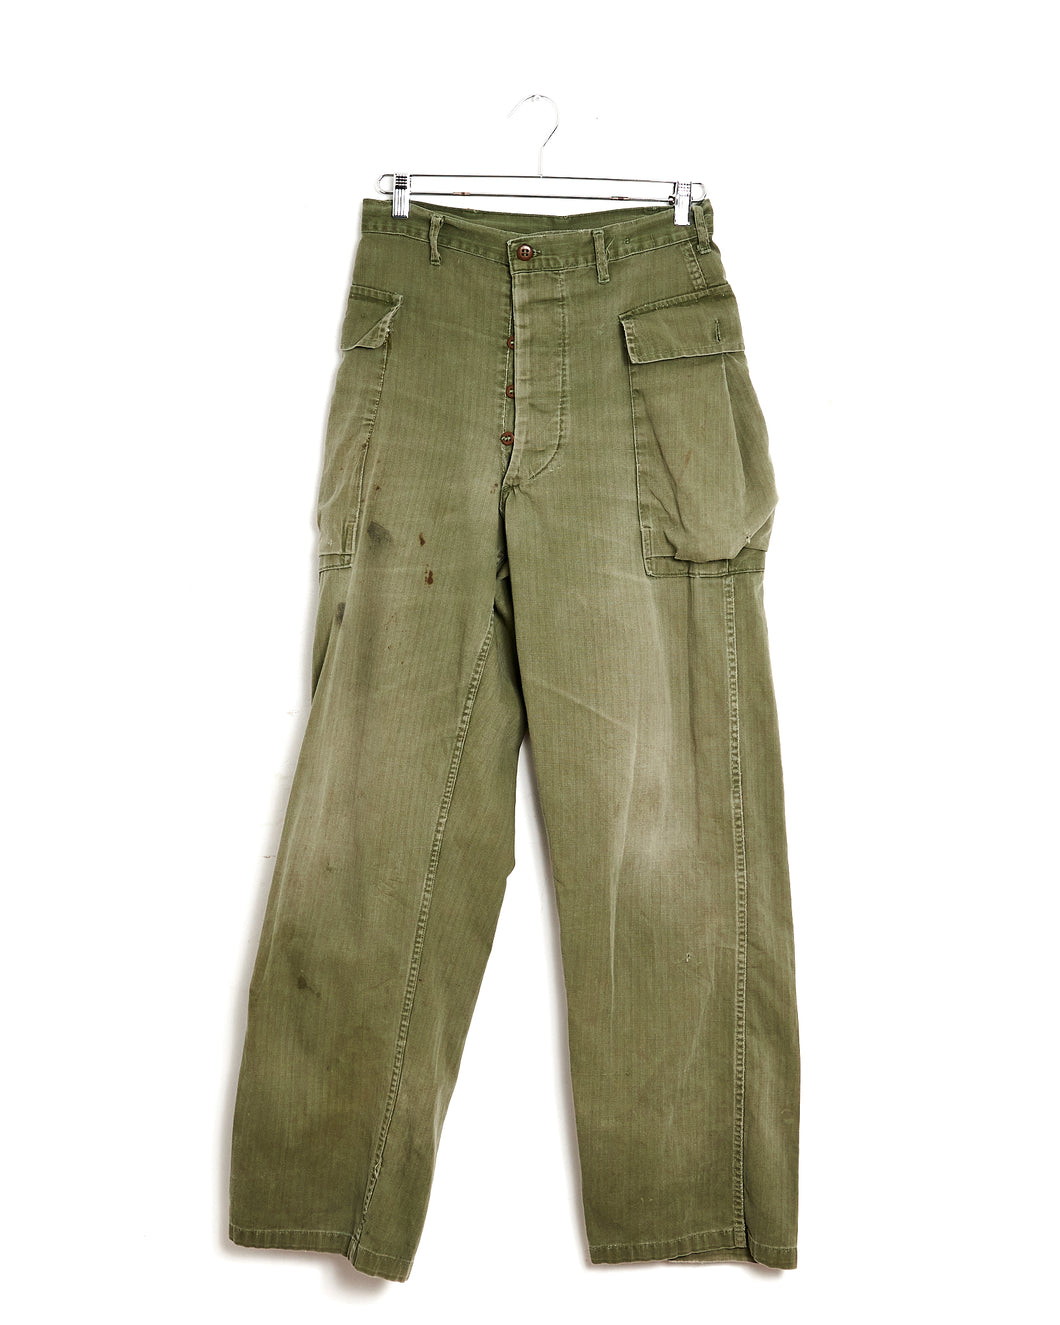 1940s US Army WWII 2nd Pattern HBT Trousers - 30x31